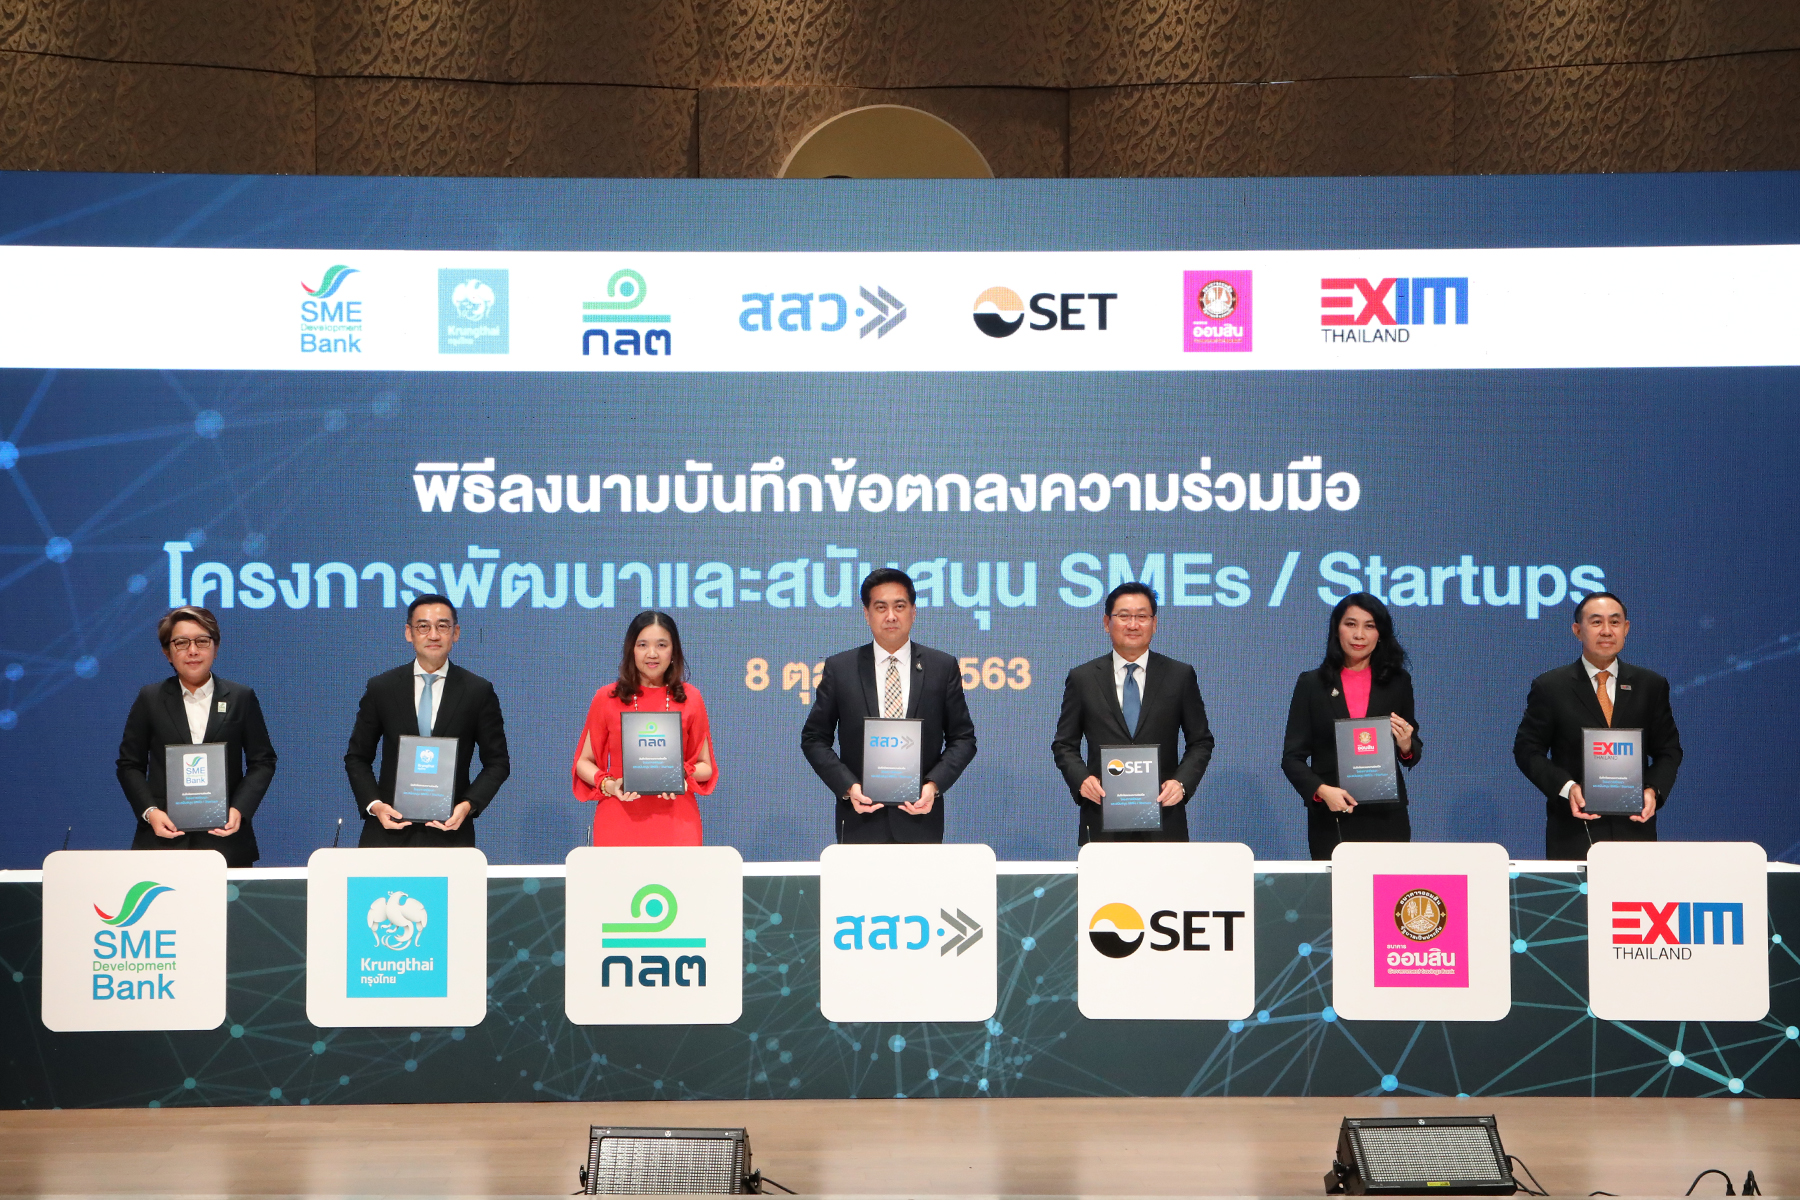 EXIM Thailand Joins Hands with SET as well as Government Alliances and Government Financial Institutions to Promote SMEs and Startups Business Growth through Capital Market